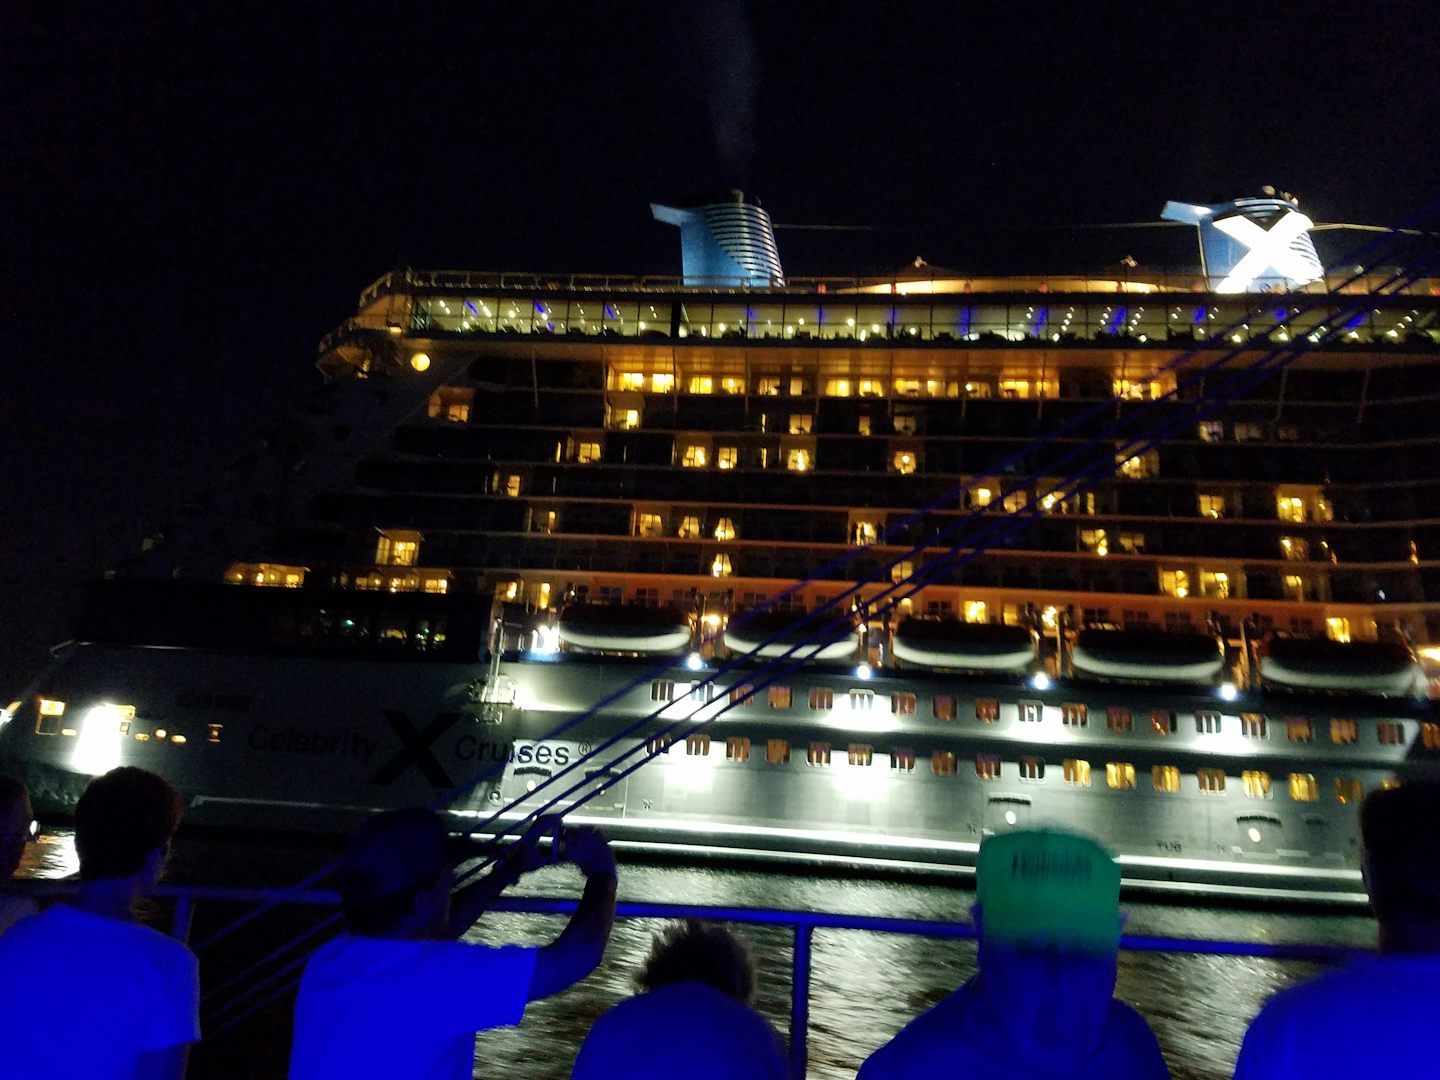 returning to our ship at night.